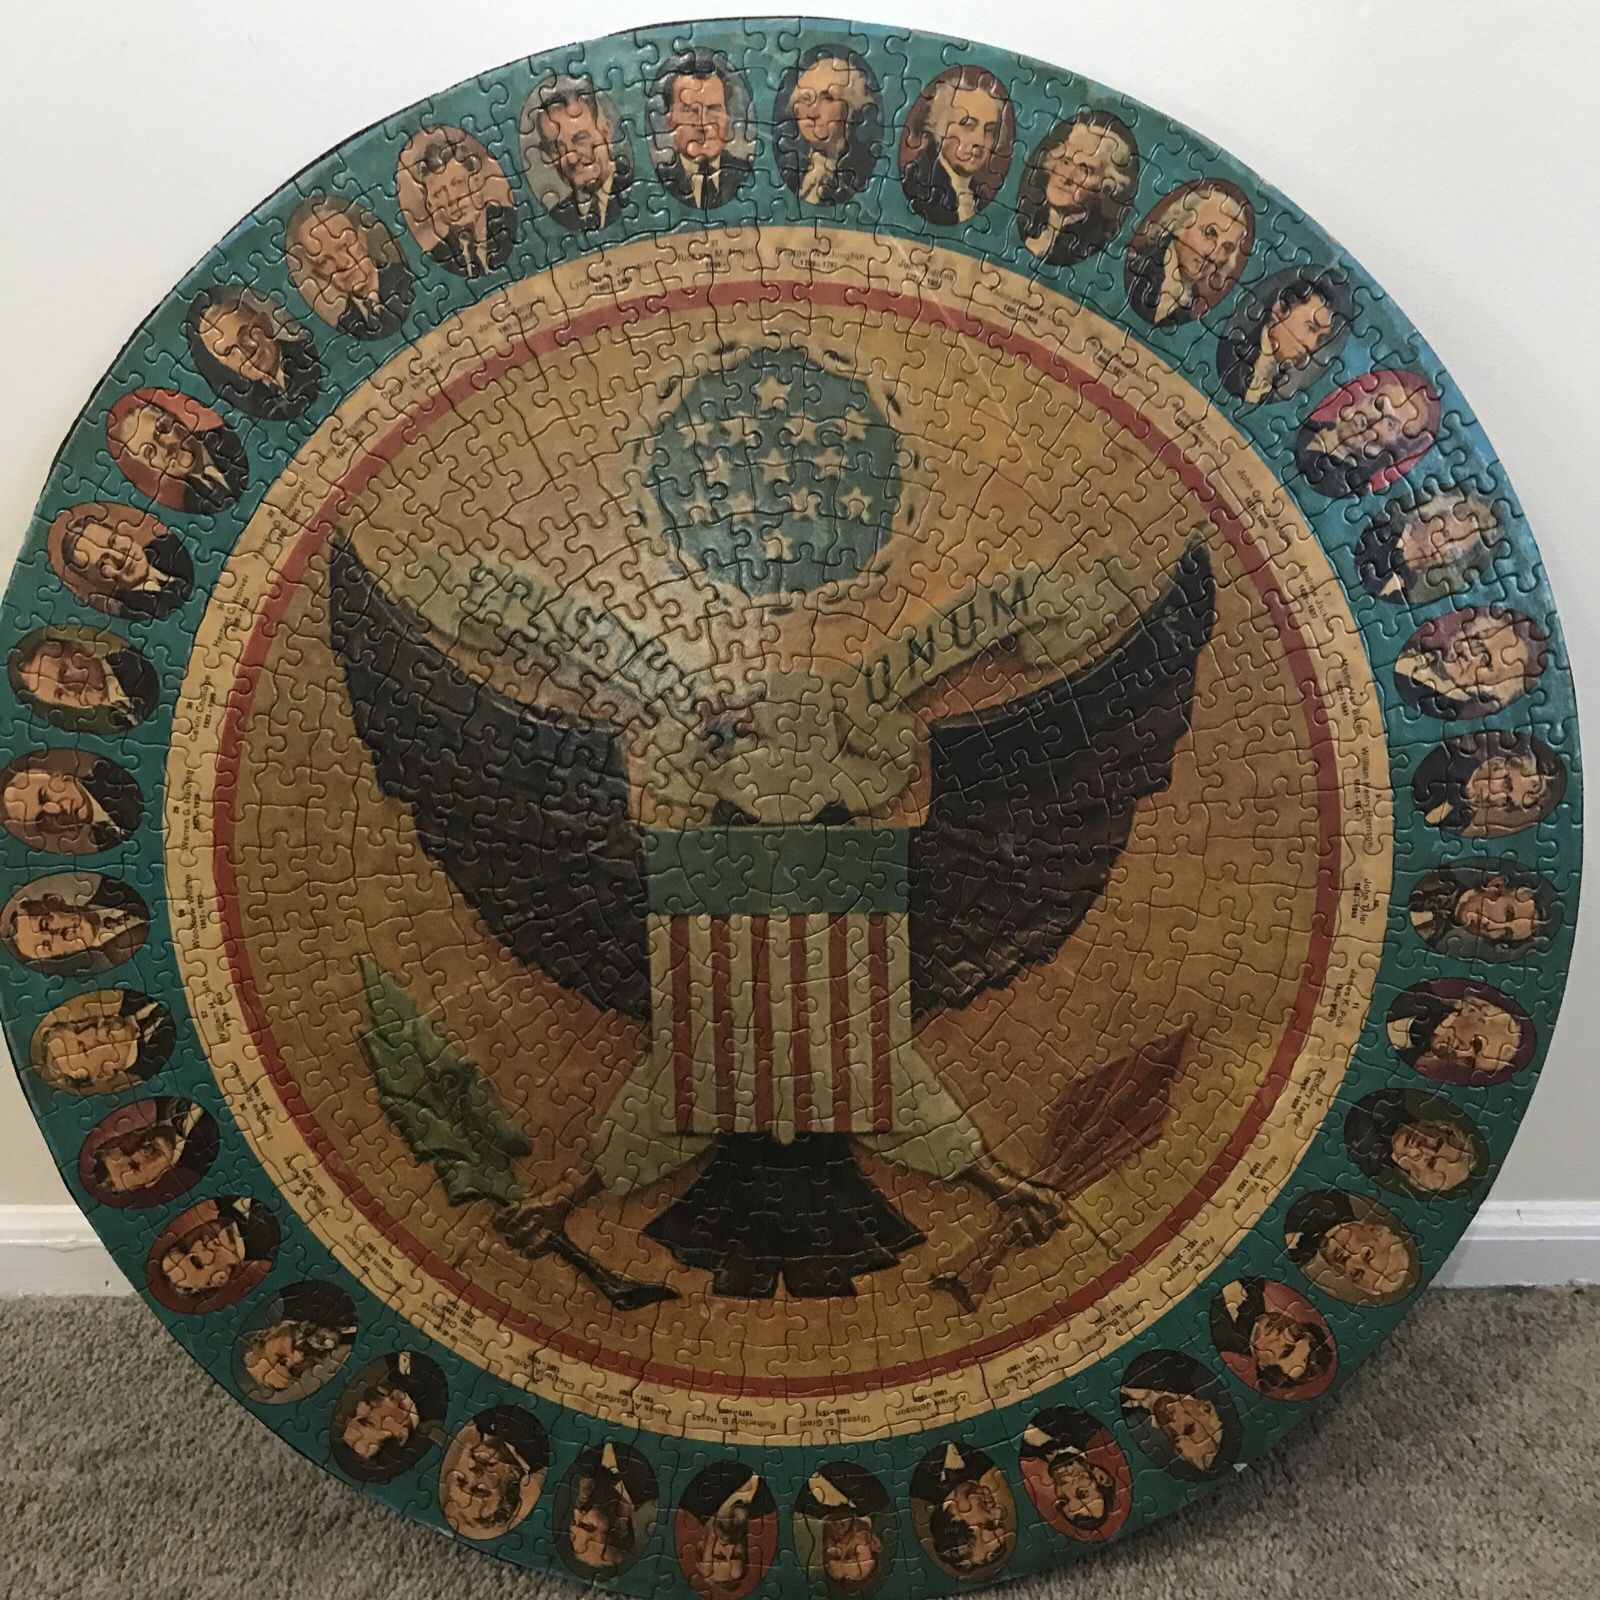 1969 Presidential 1000 Piece Jigsaw Puzzle , Mounted To Wood Backing Measures 24” Round Nice Condition. First 37 Presidents 